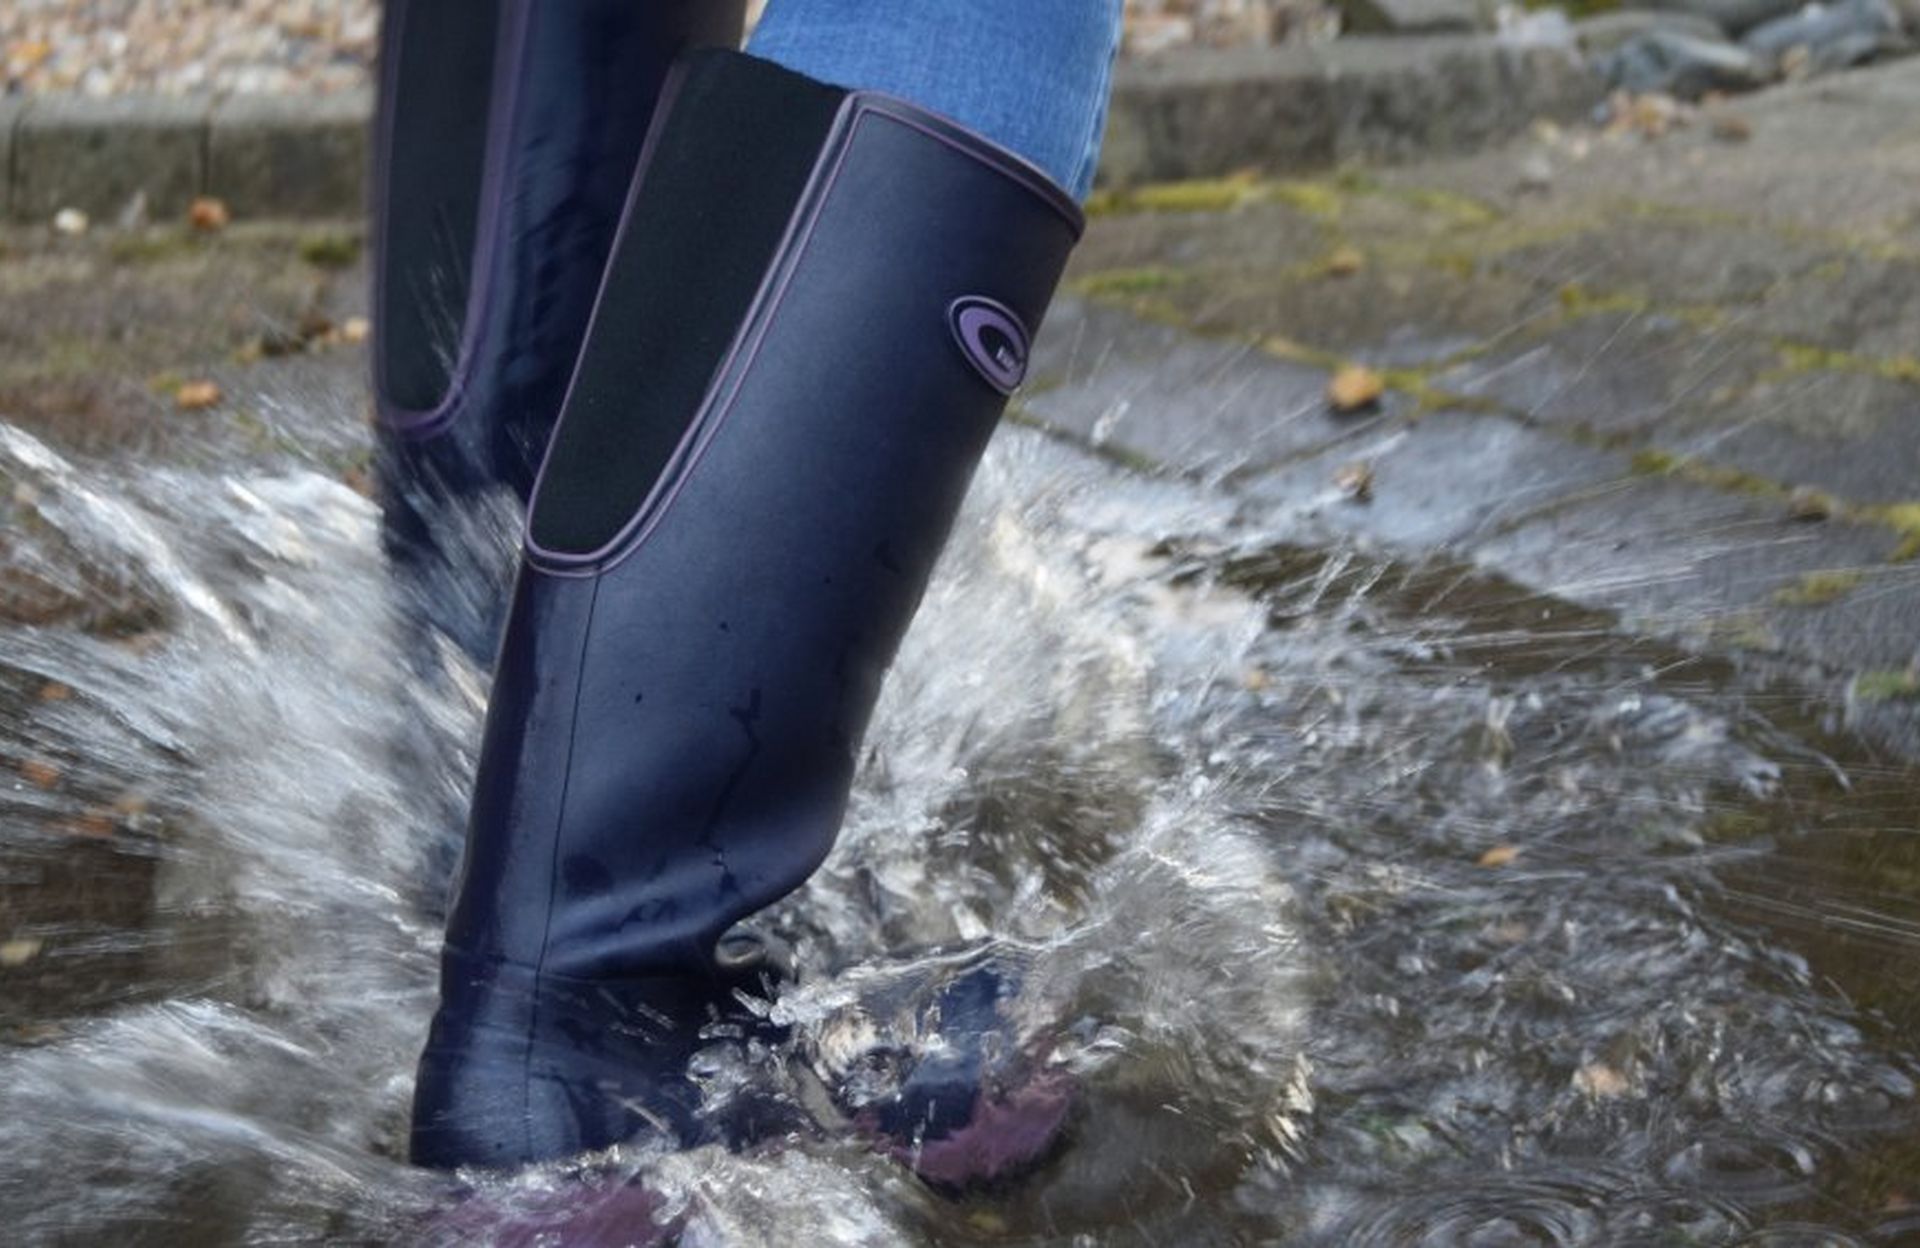 Grubs Wellies – Find Your Style